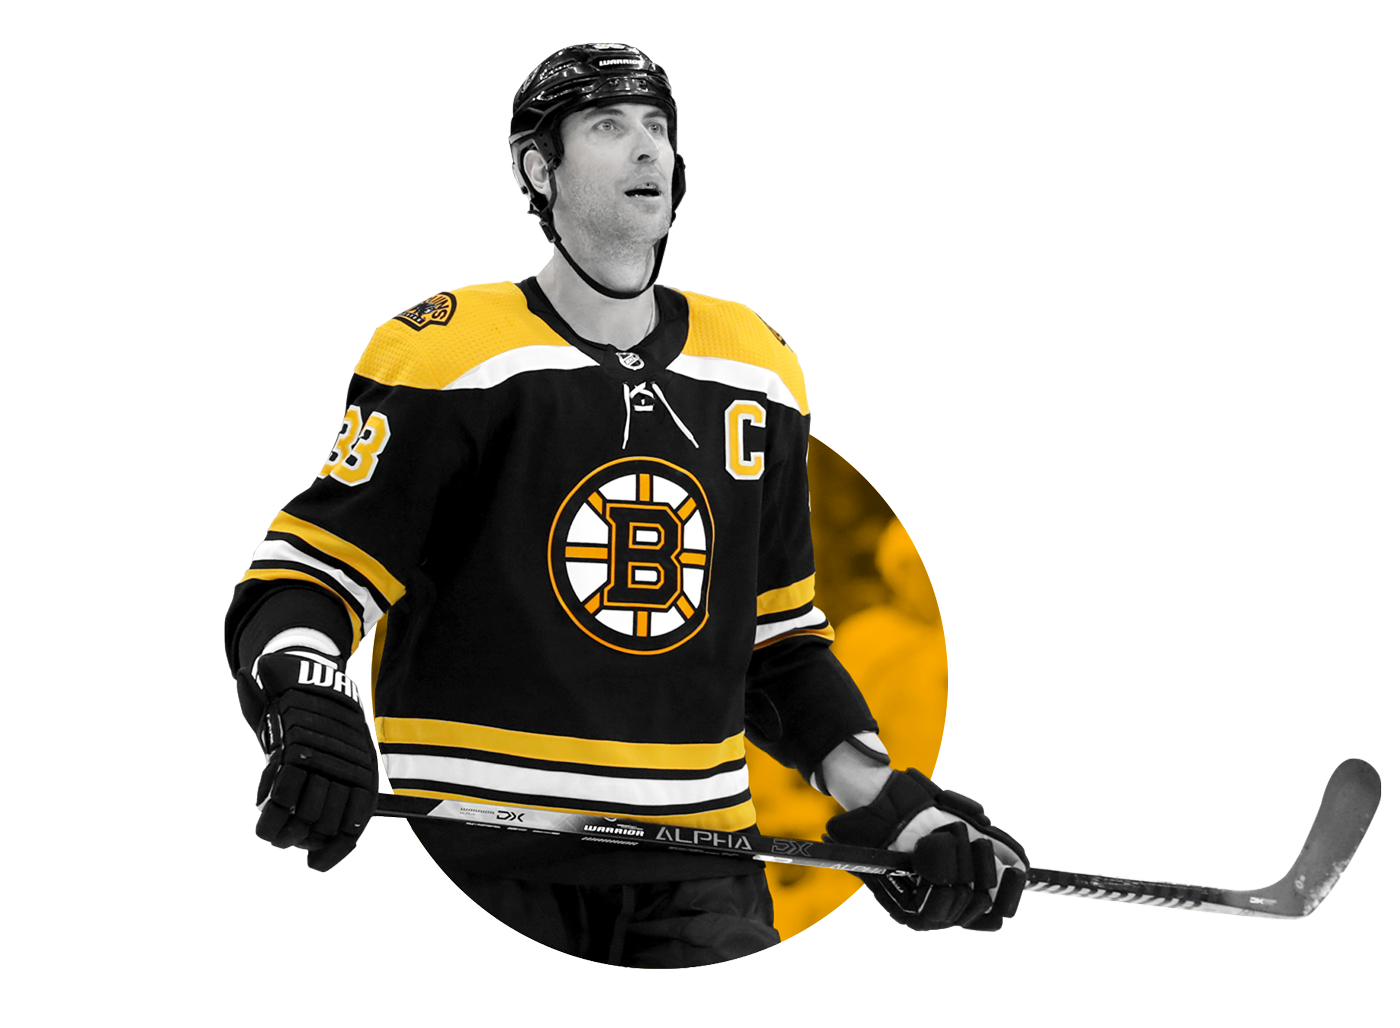 When should the Bruins retire Zdeno Chara's number and which